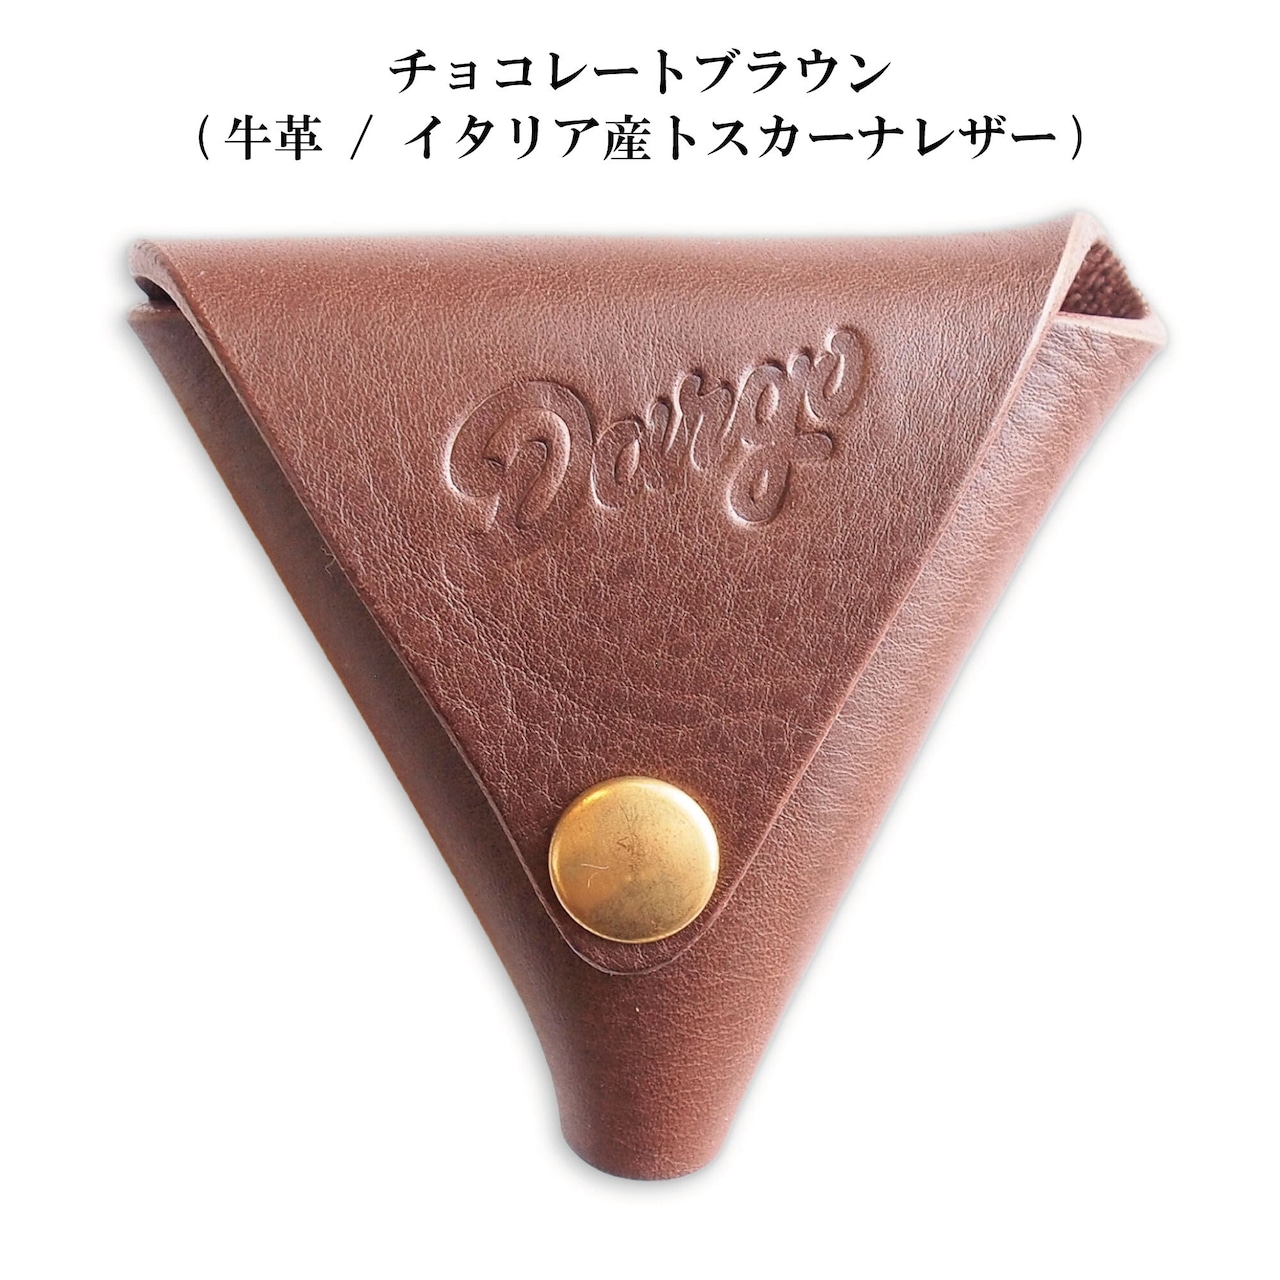 【DARGO】Leather Coin Case (3color)